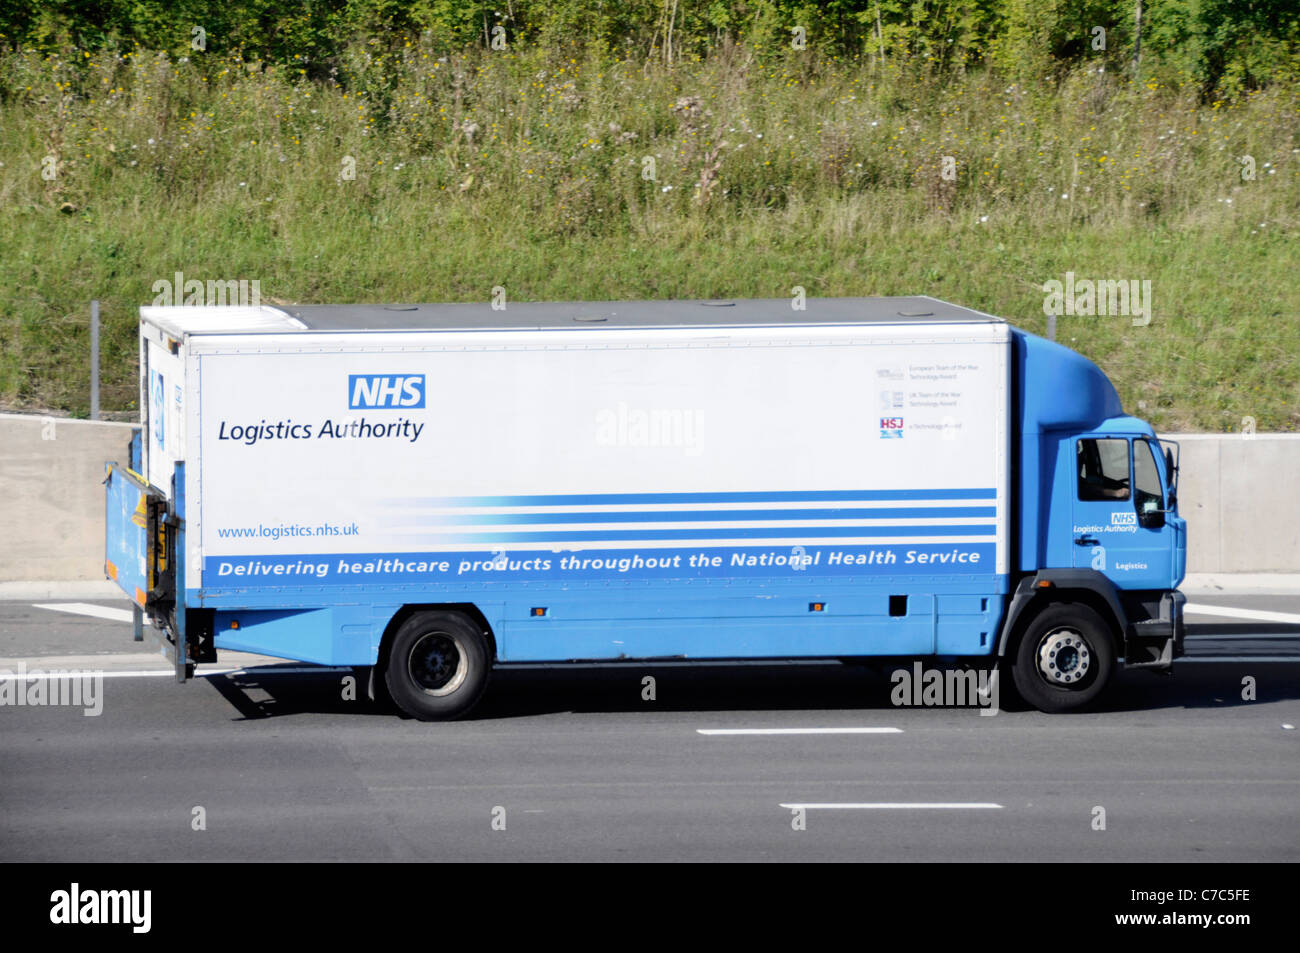 Logistics Authority NHS supply chain hgv delivery lorry truck delivering medical healthcare value to national health service driving along UK motorway Stock Photo